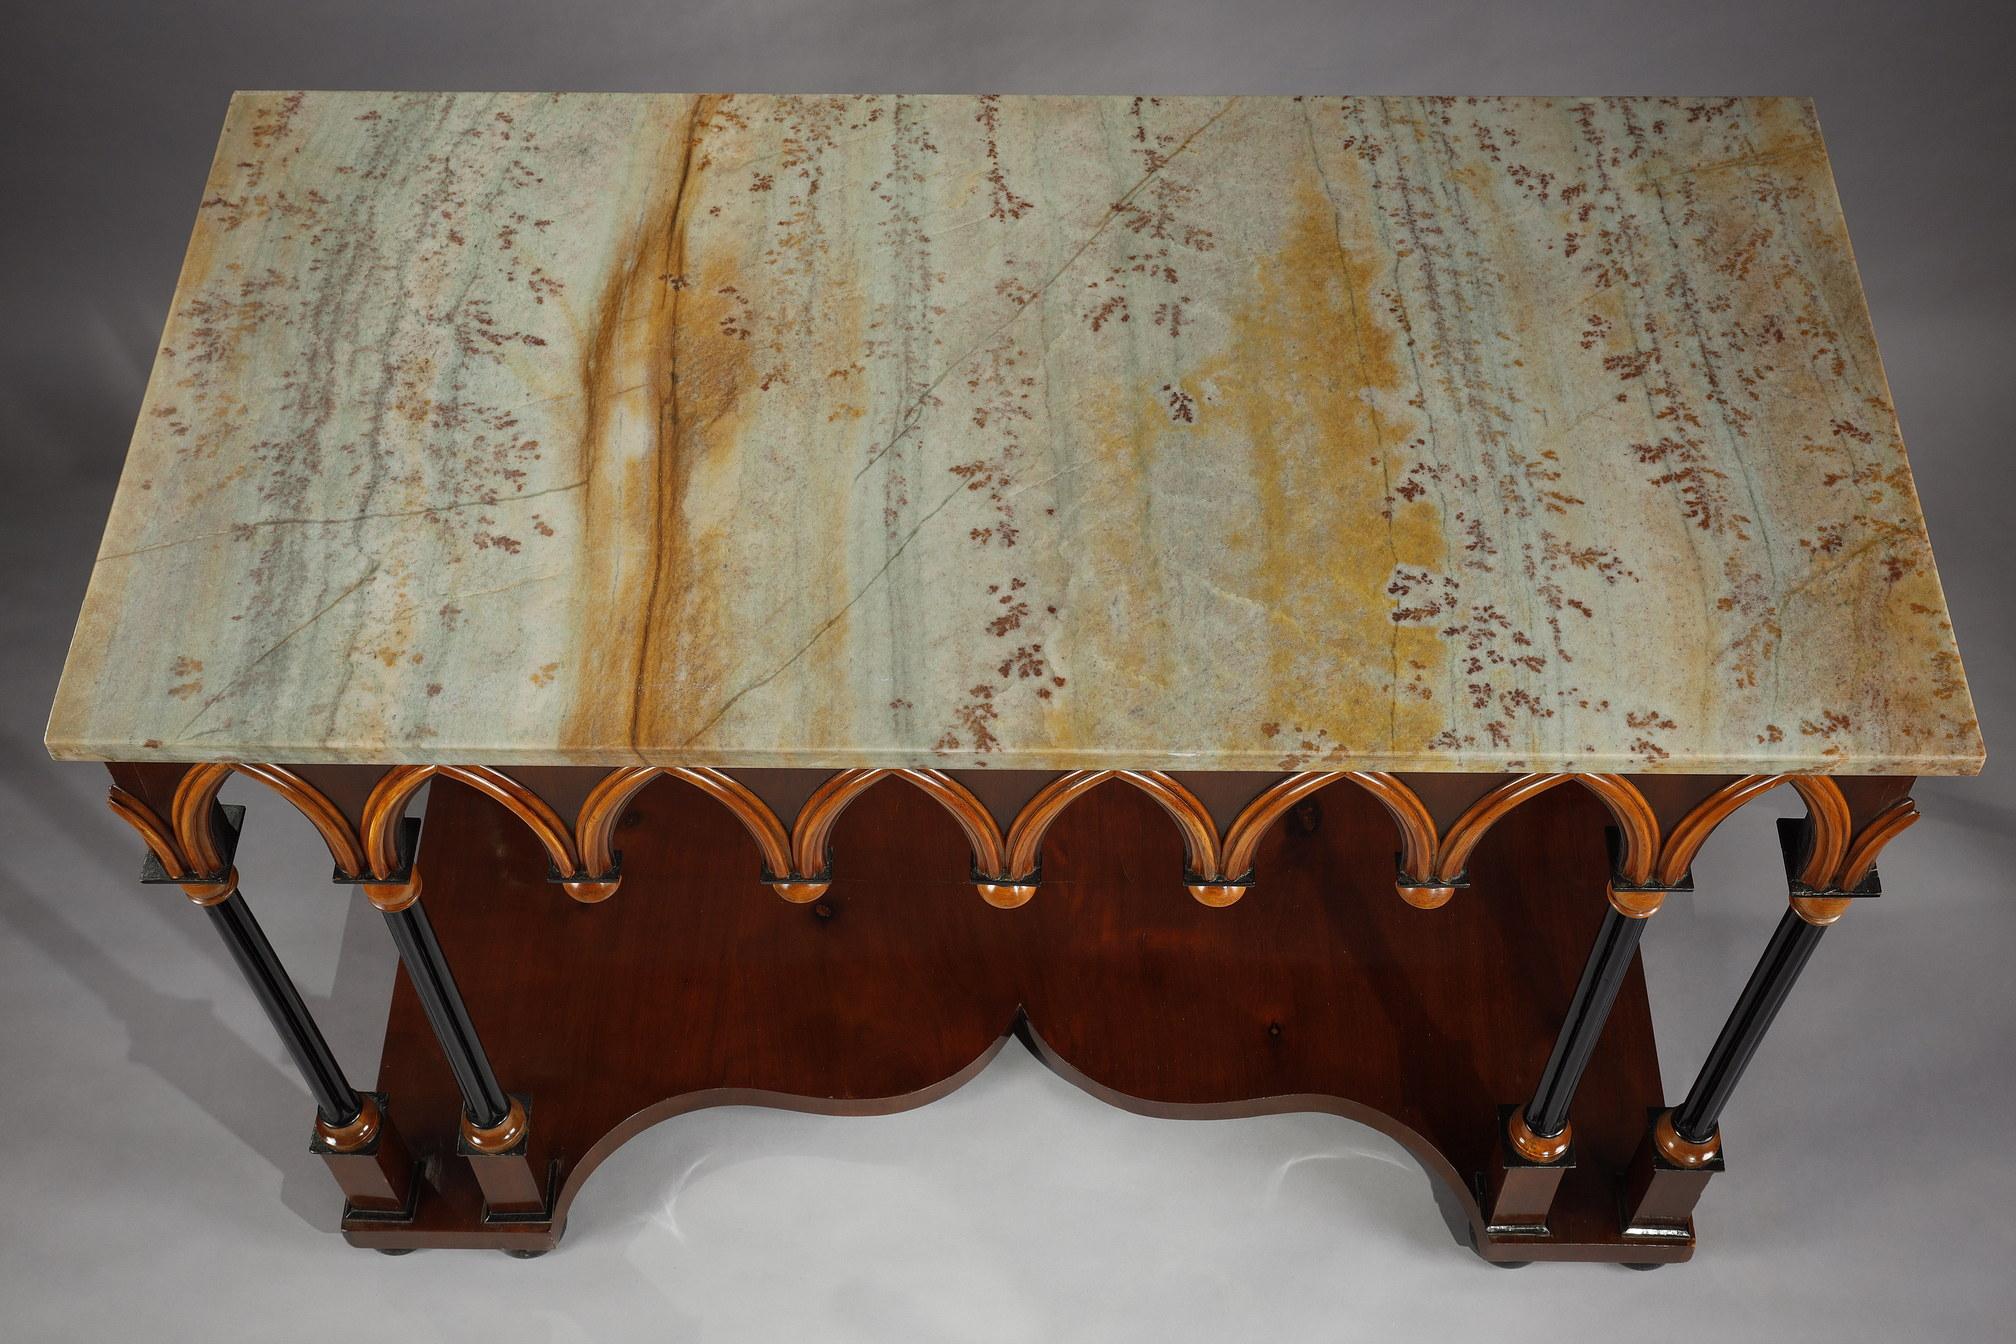 Gothic Revival Neo-Gothic Wooden and Marble Console Table, France, circa 1830